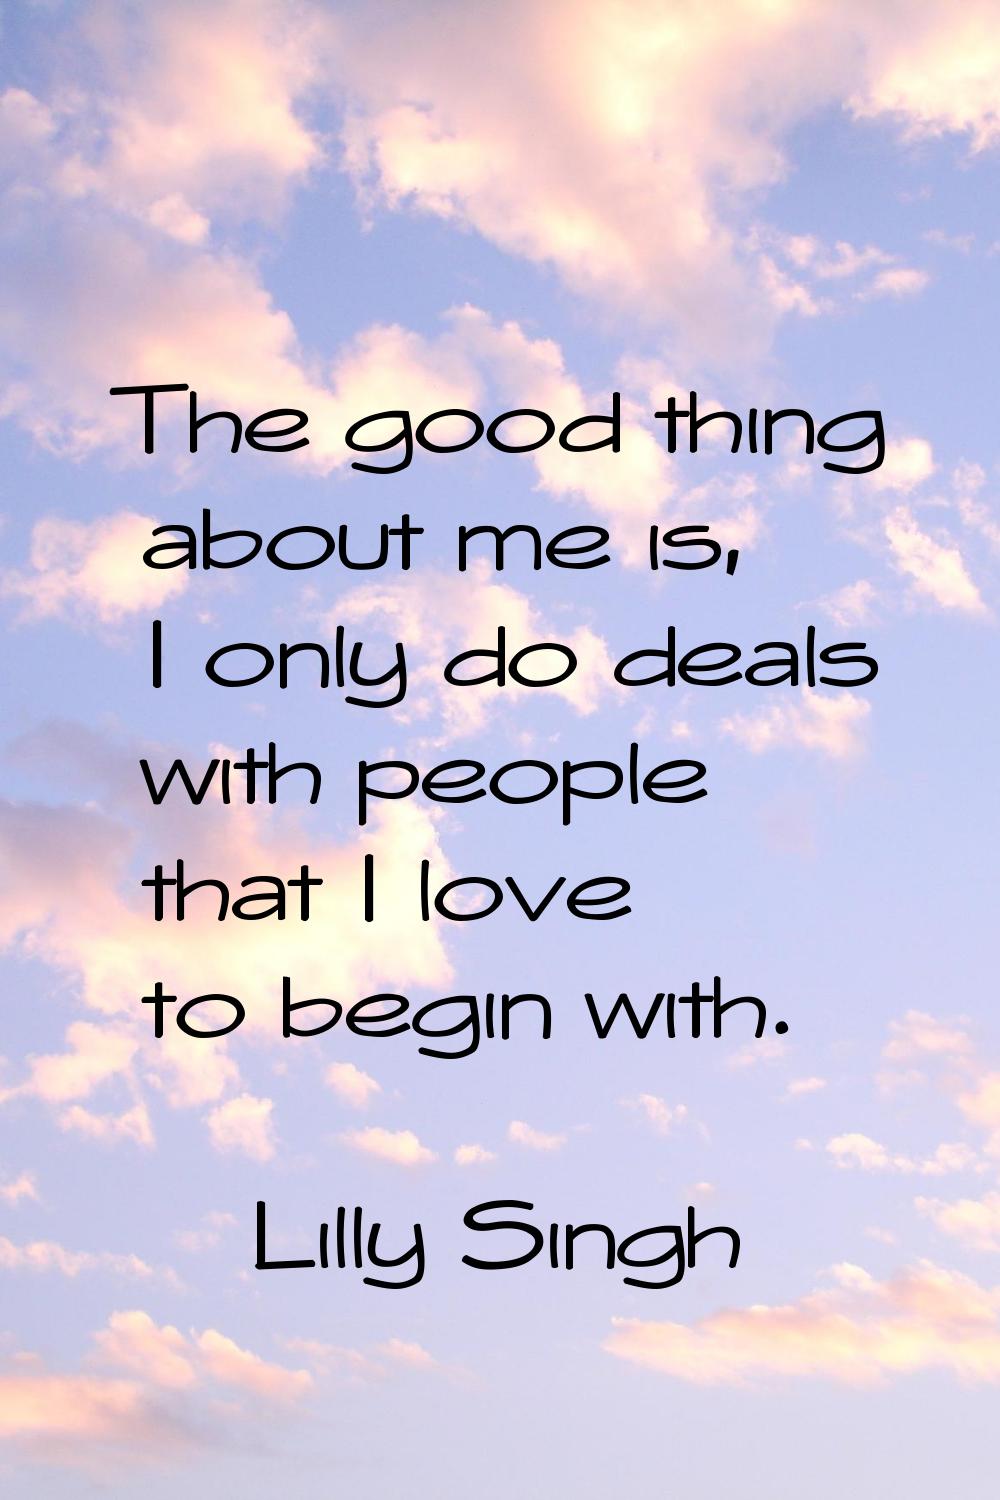 The good thing about me is, I only do deals with people that I love to begin with.